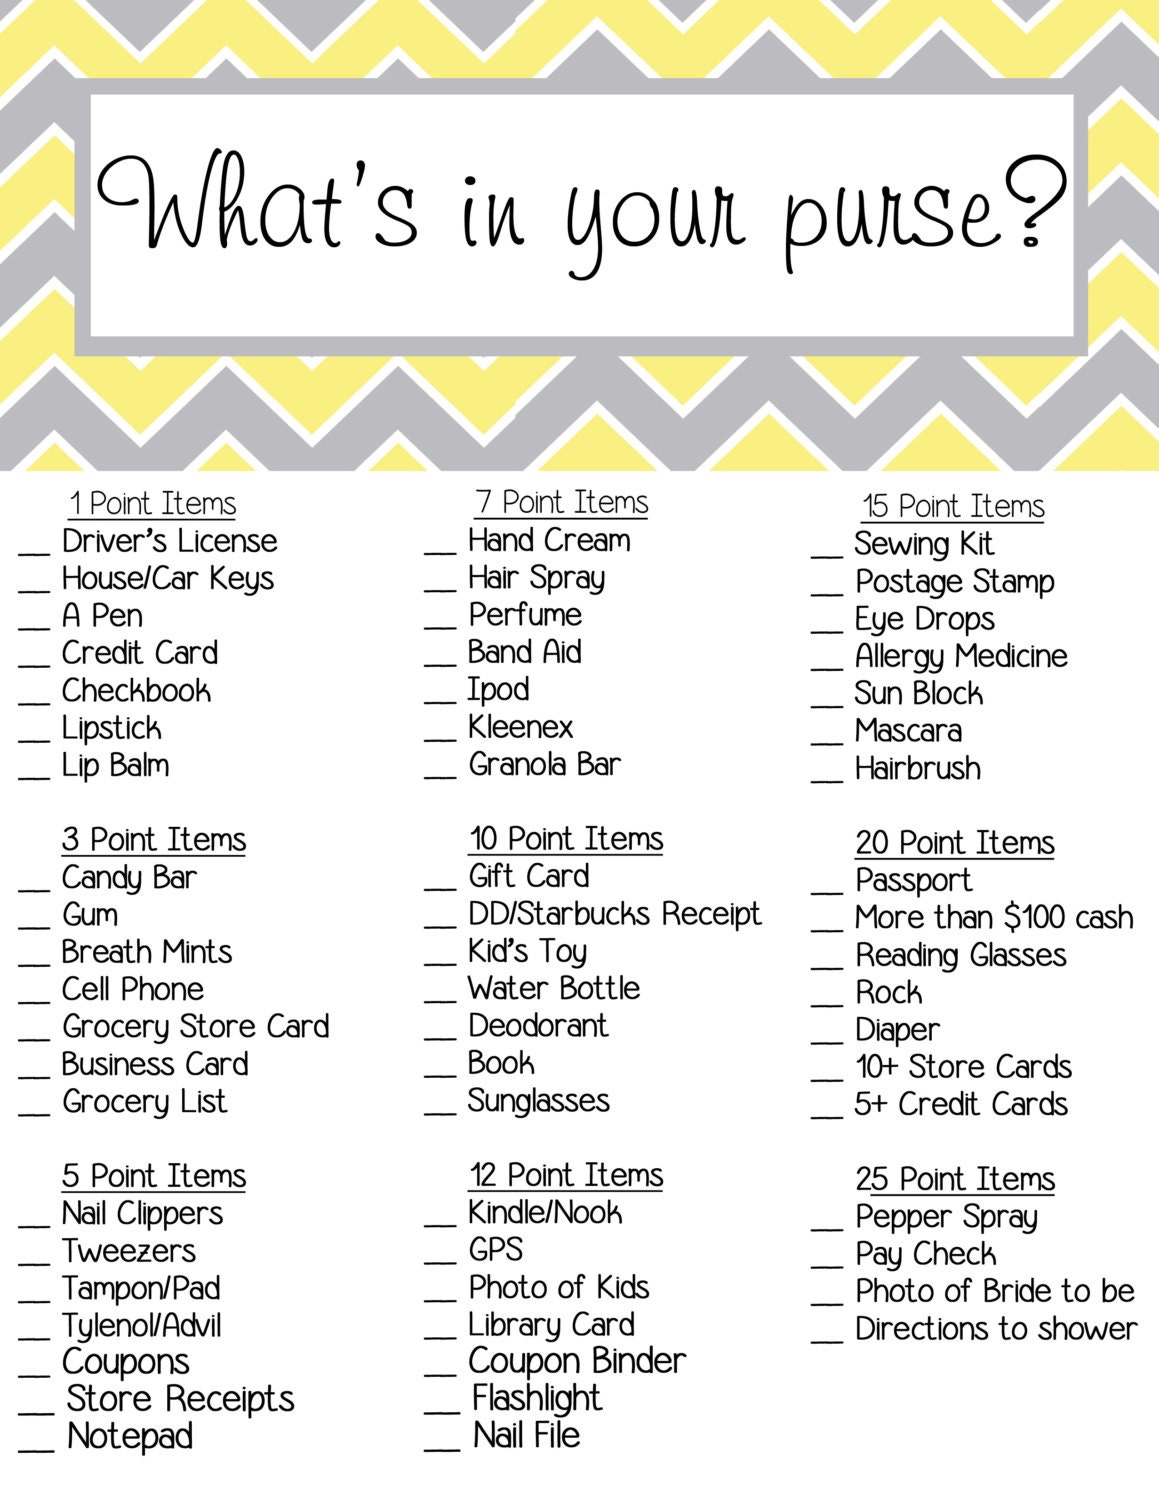 Bridal Shower Game What's in your purse by SandInMyShoesDesigns